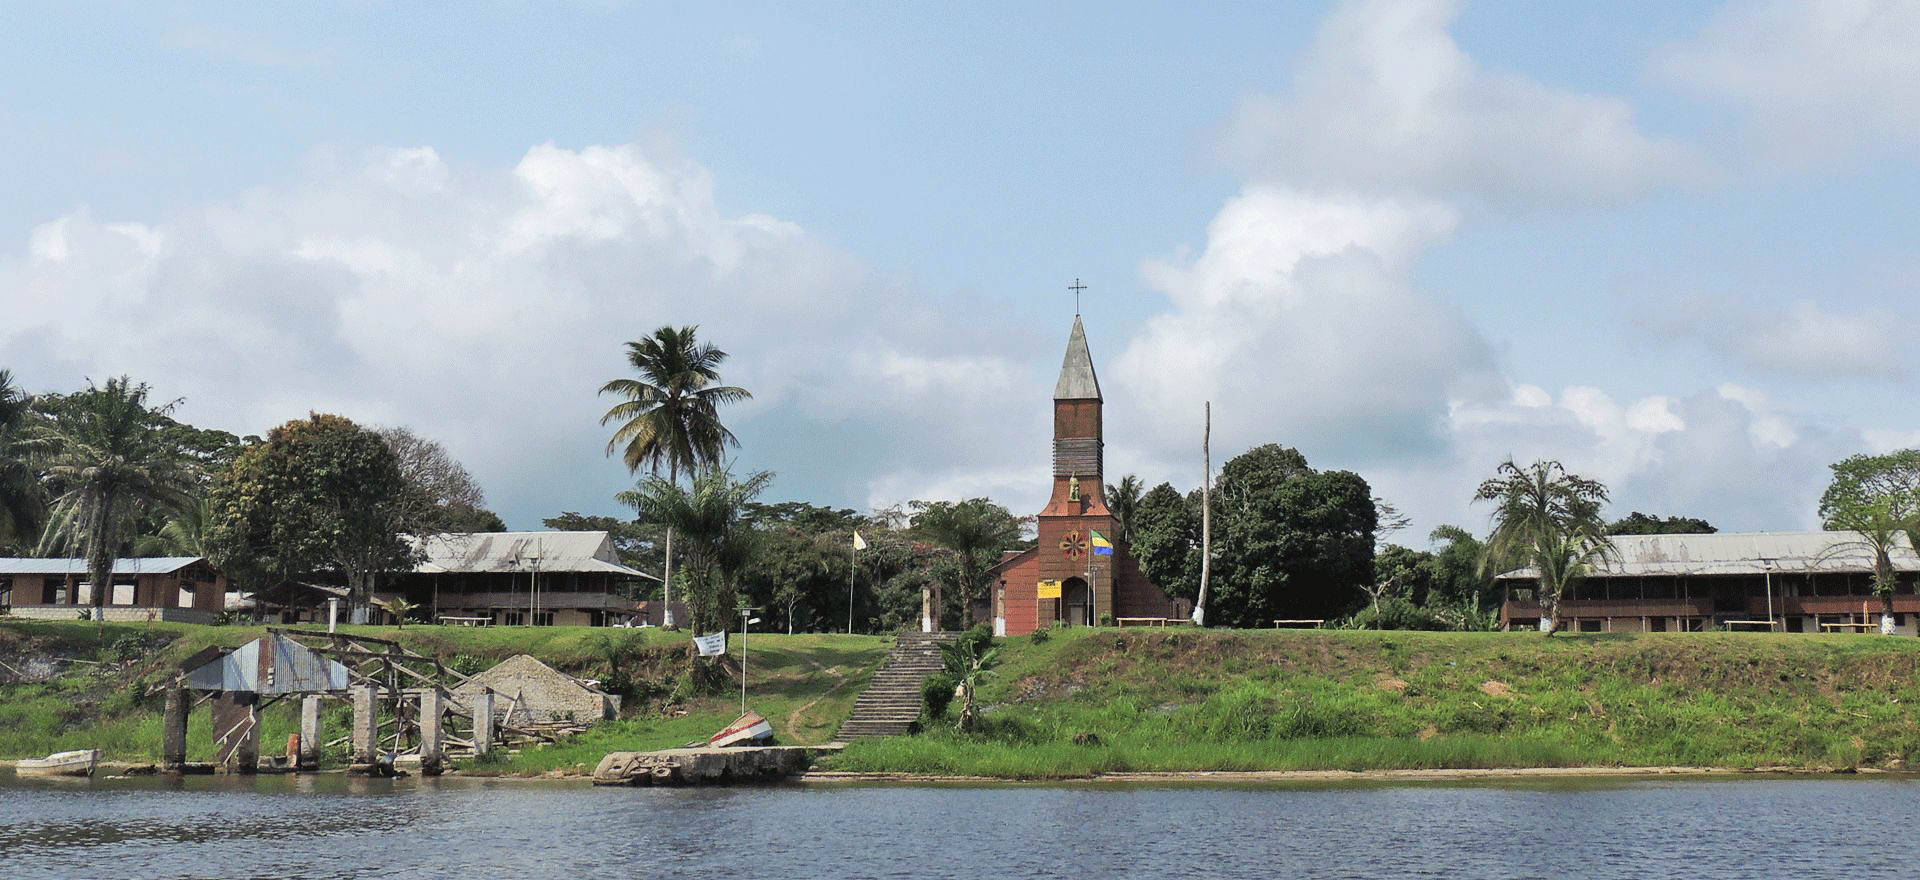 Gabon Holidays and Tours - View of Lambarene from the river